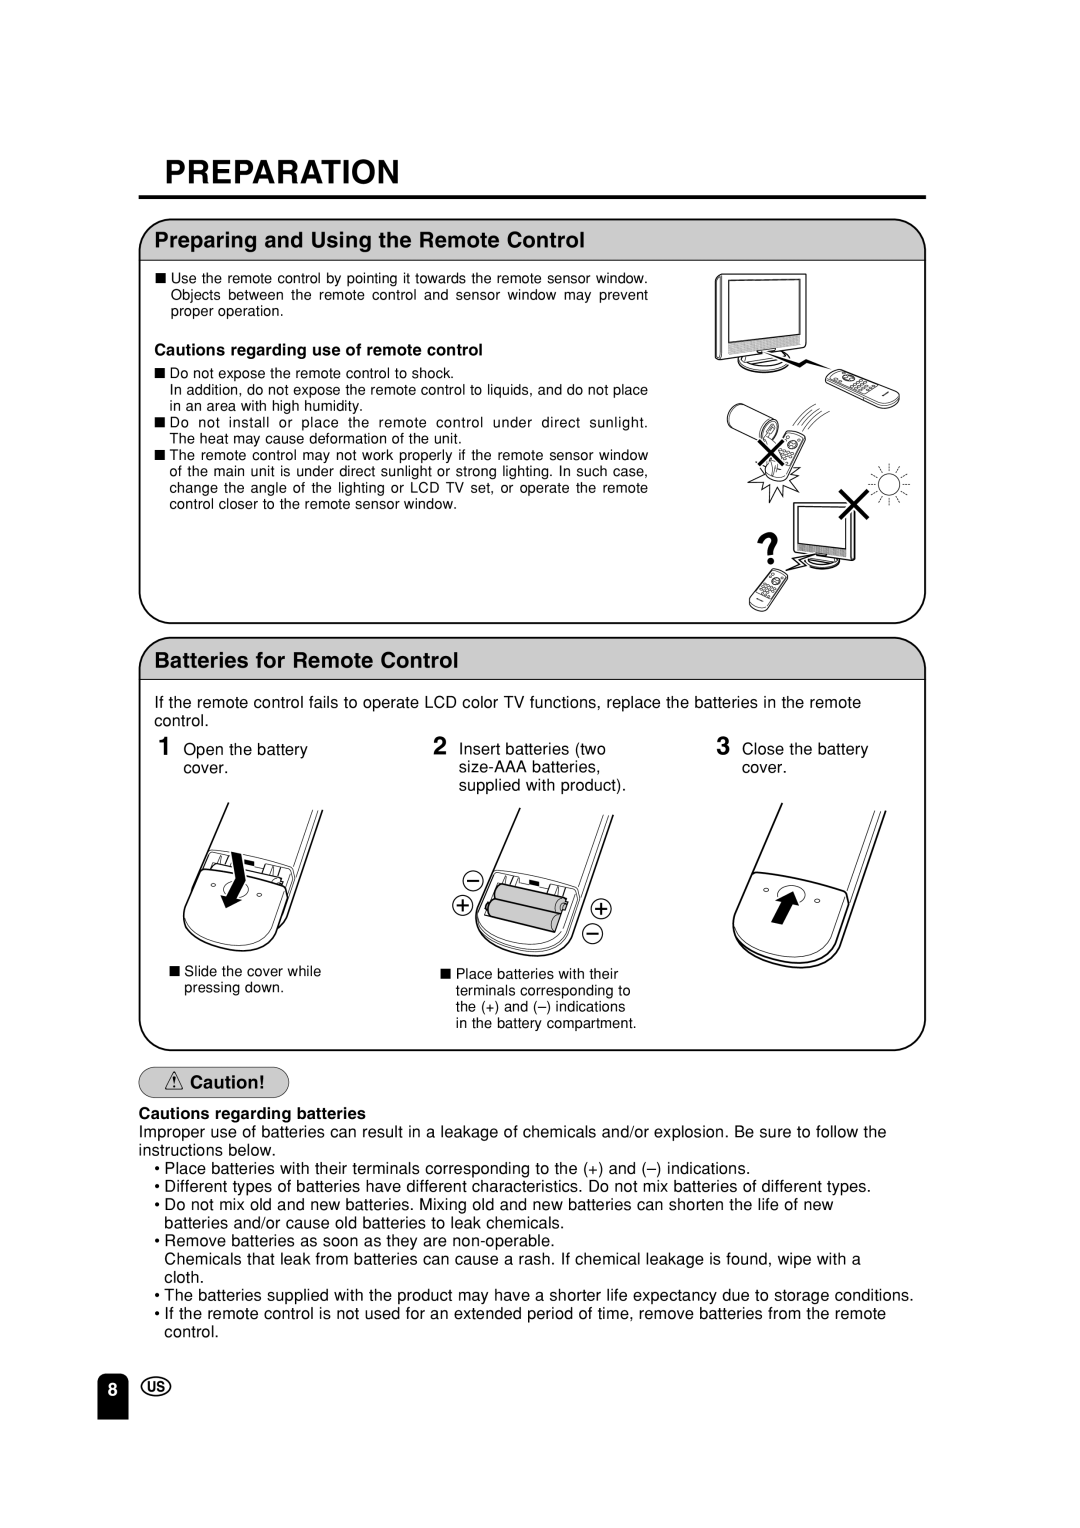 Sharp LC 15A2U operation manual Preparation, Preparing and Using the Remote Control, Batteries for Remote Control 